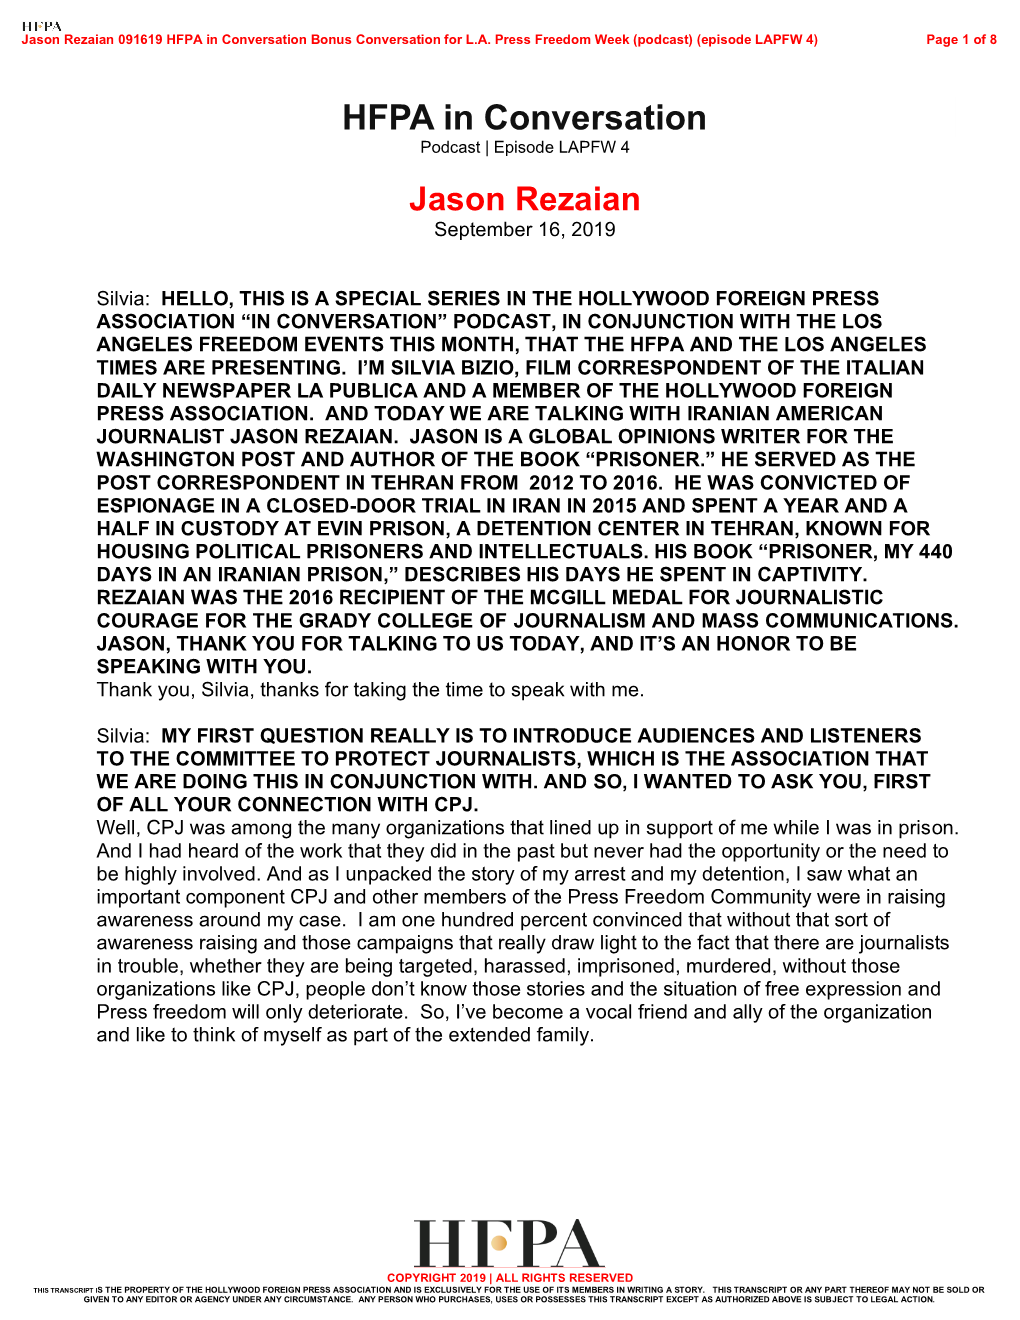 Jason Rezaian 091619 HFPA in Conversation Bonus Conversation for L.A. Press Freedom Week (Podcast) (Episode LAPFW 4) Page 1 of 8